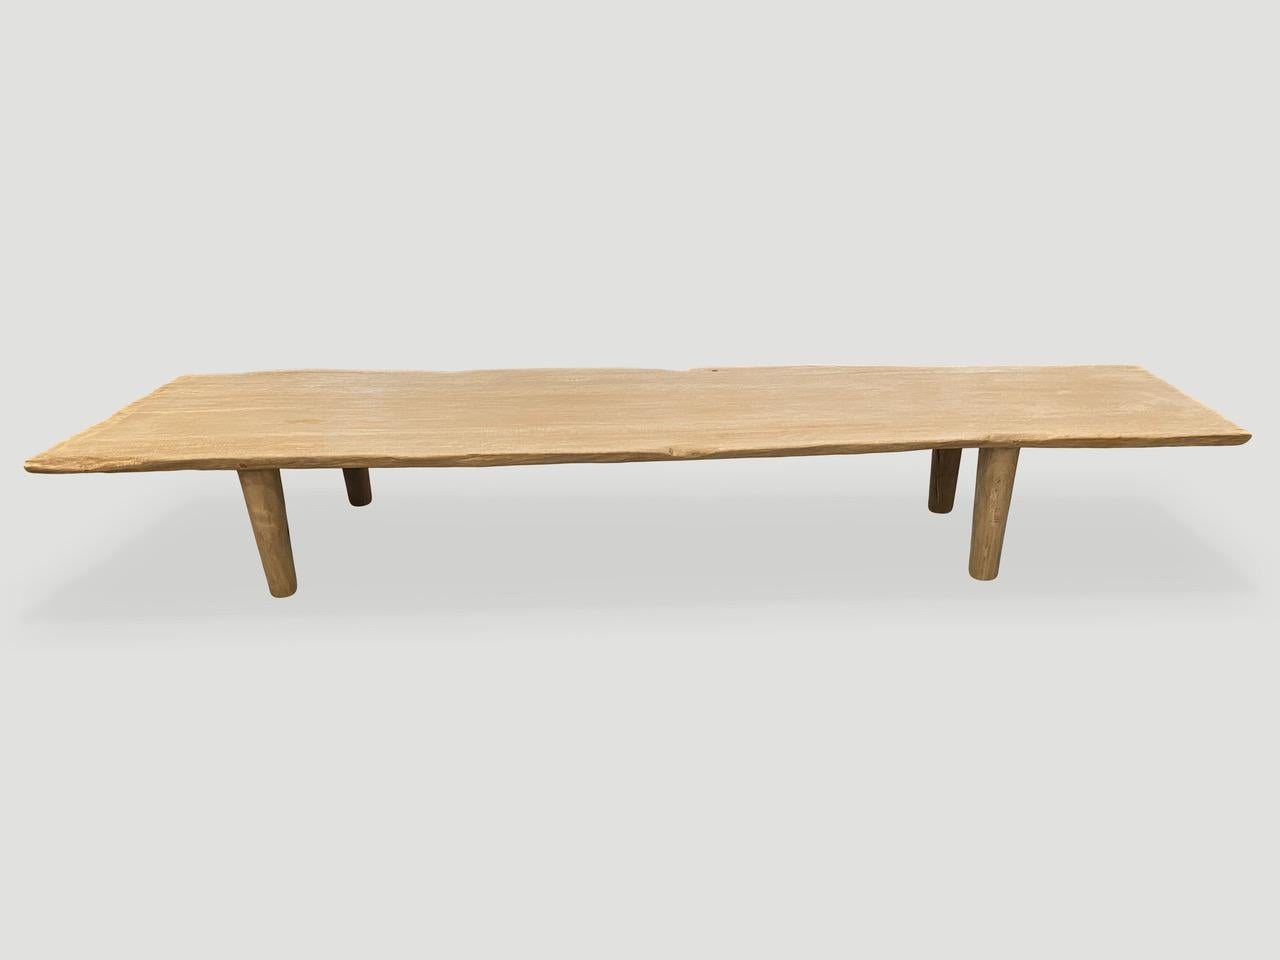 Andrianna Shamaris White Washed Live Edge Teak Wood Coffee Table or Bench For Sale 4